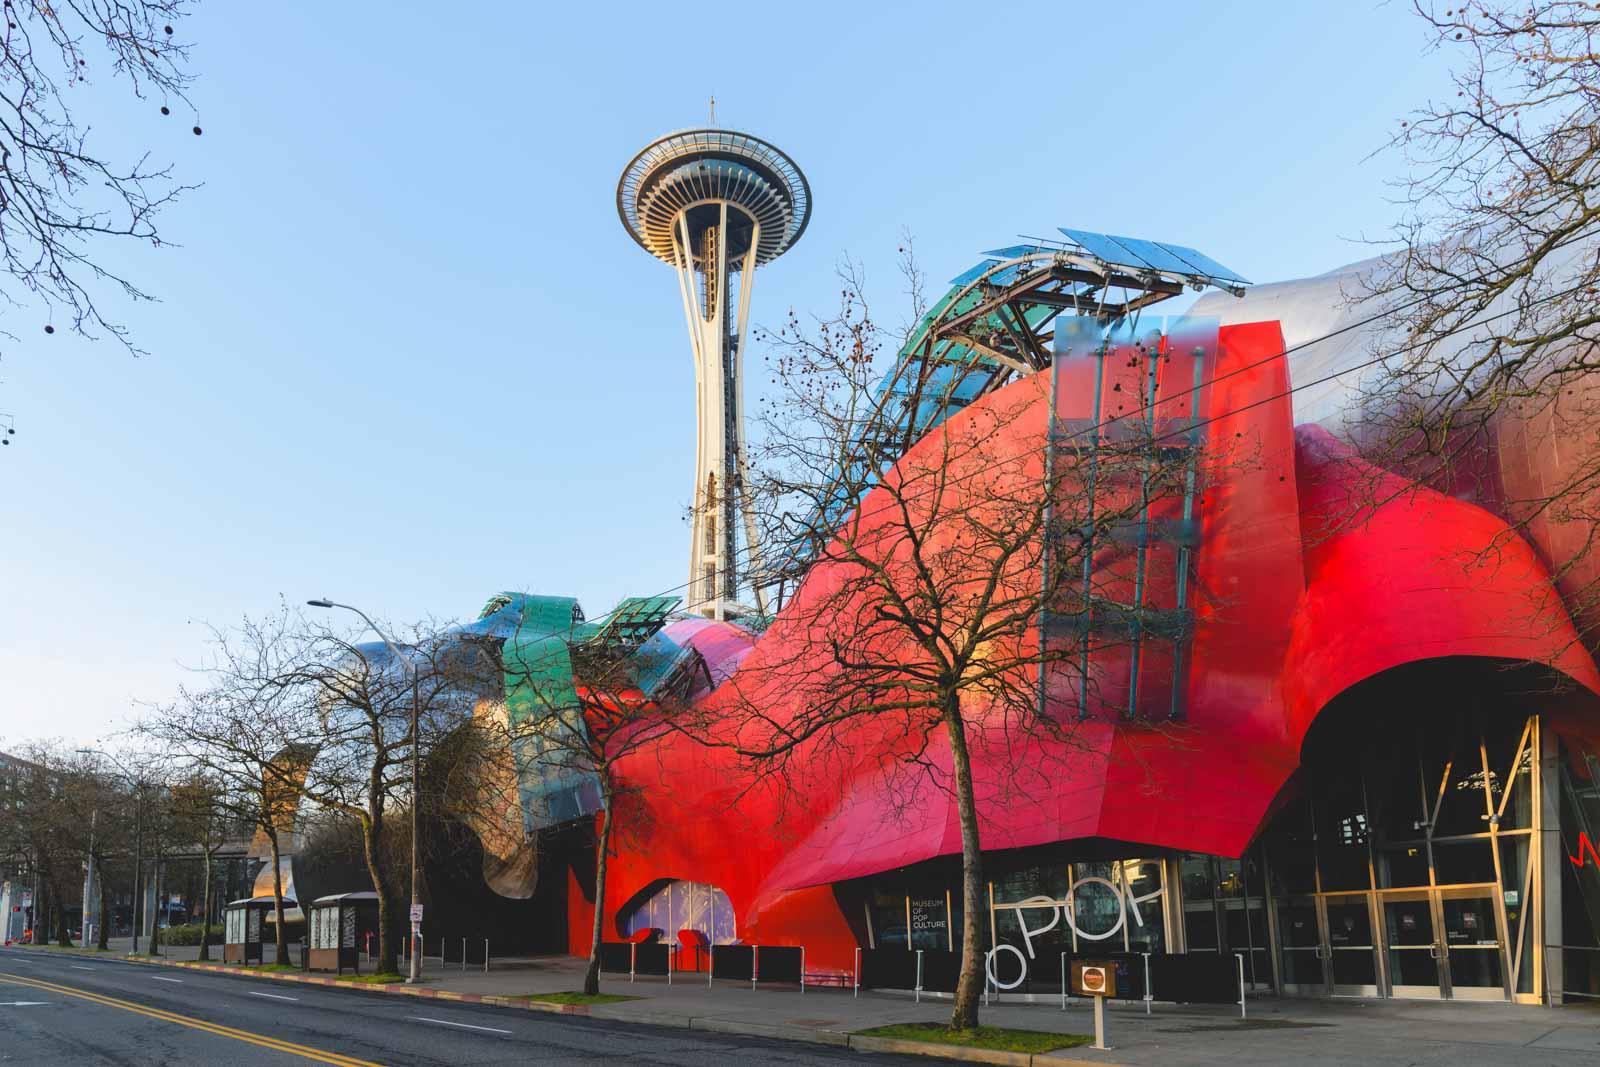 A roadside view of the colorful Mopop Art Museum and Space Needle in Seattle.